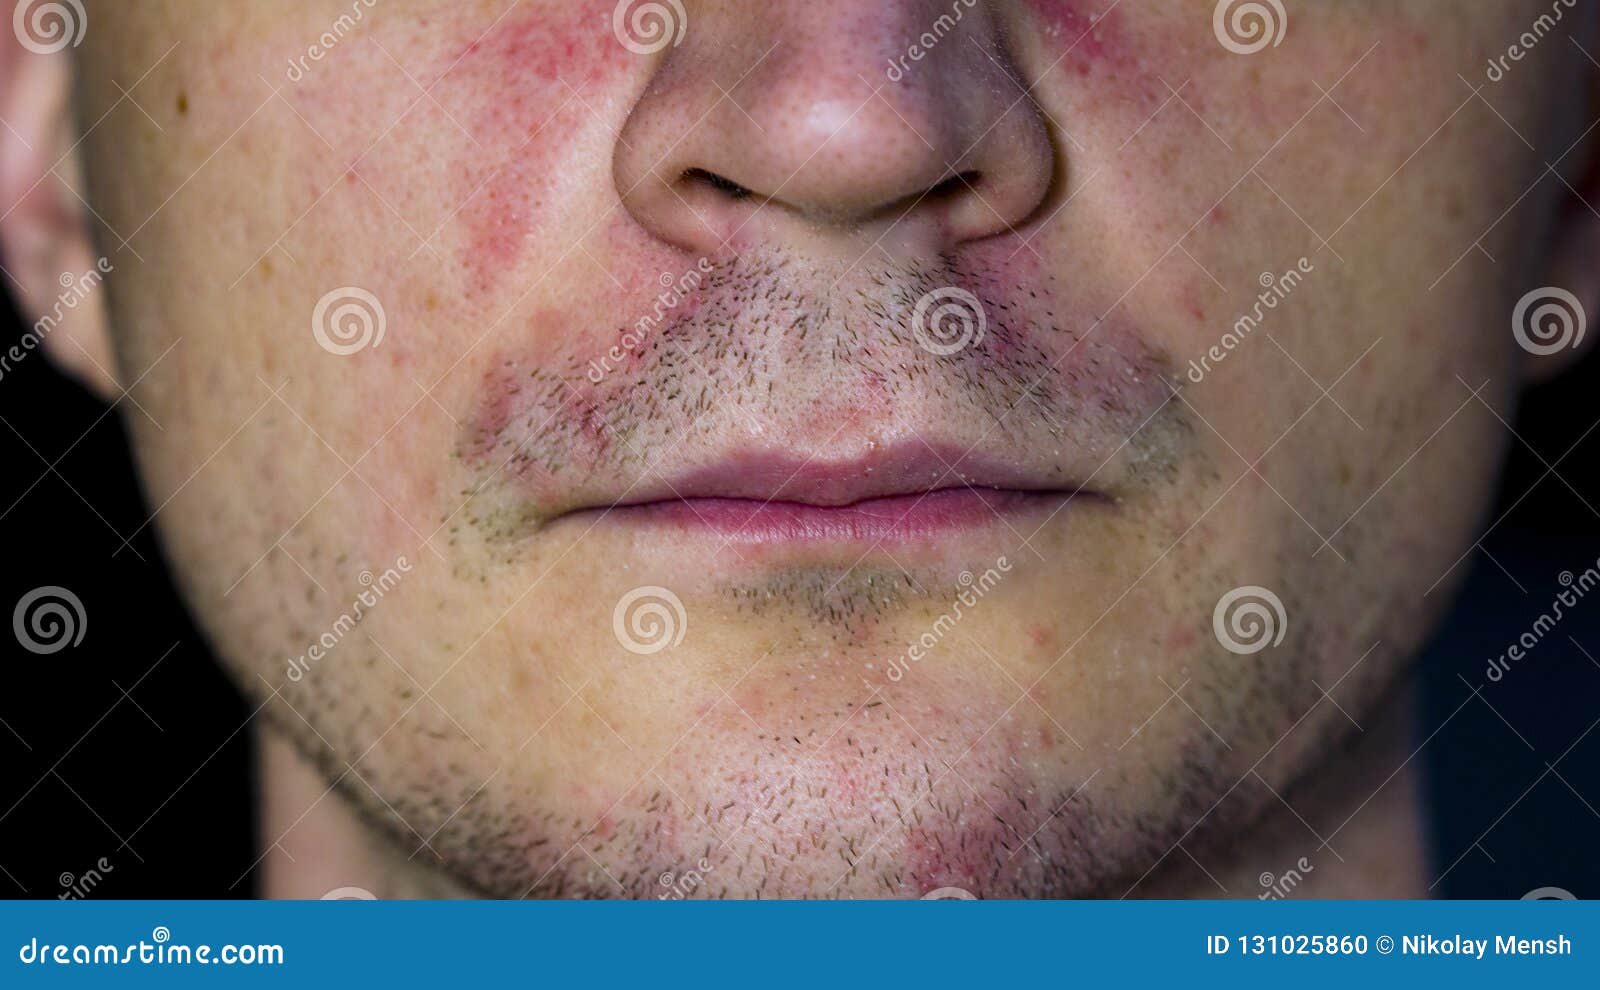 perioral dermatitis - skin disease on the face